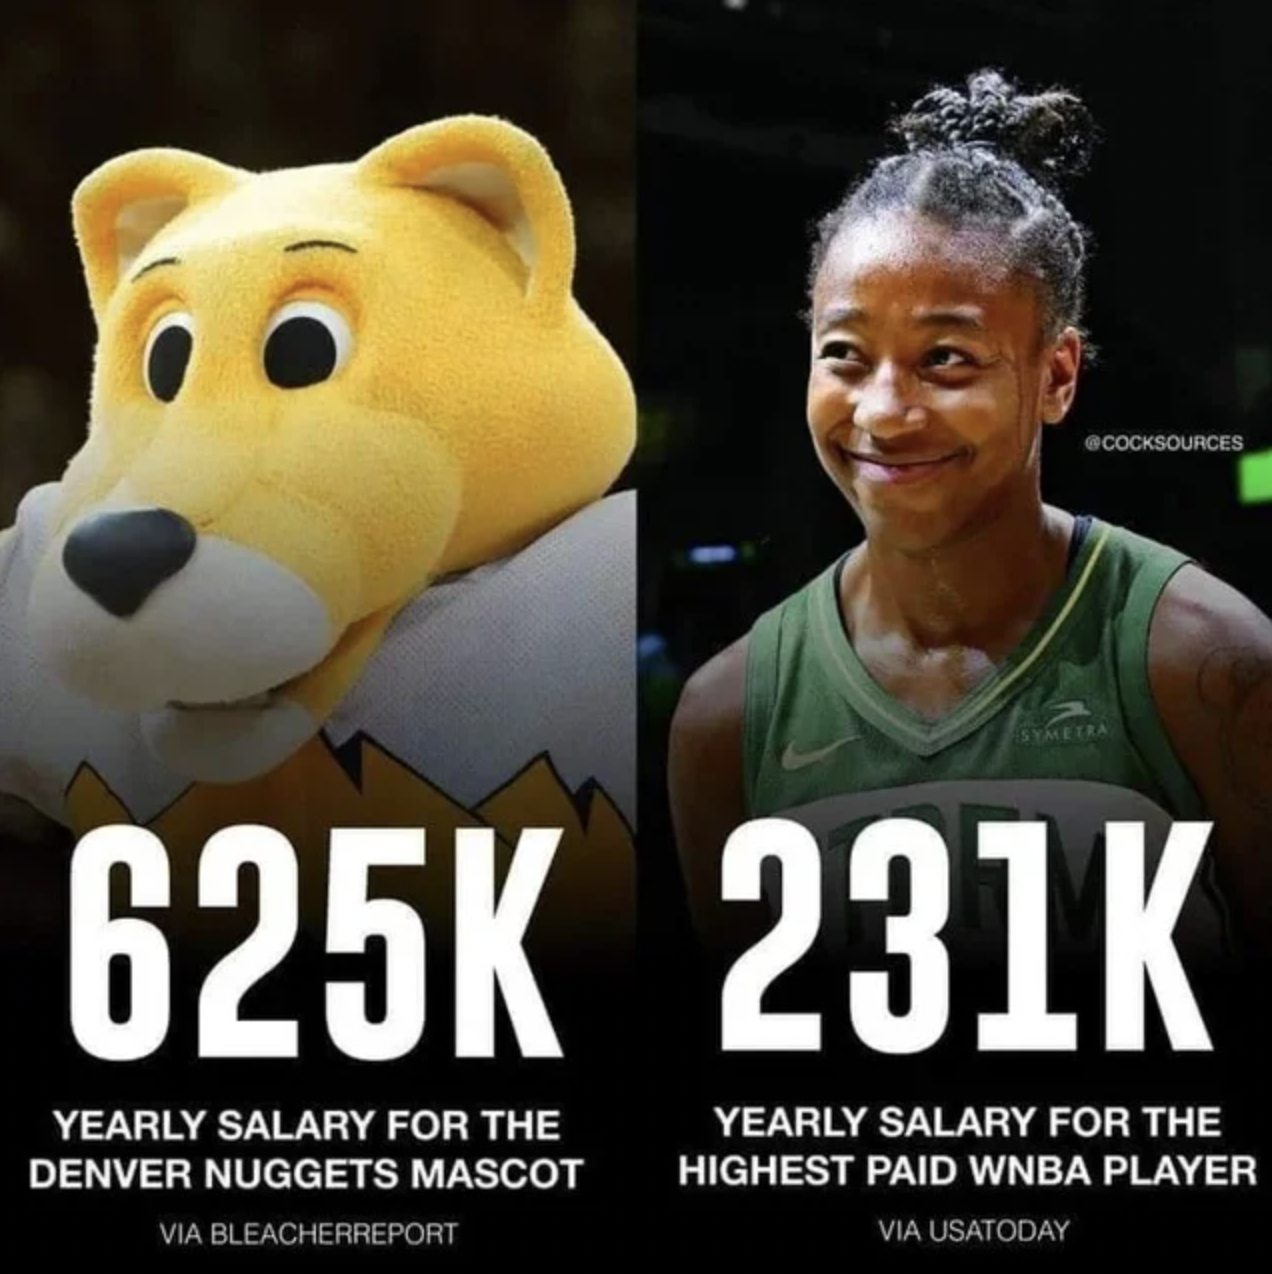 photo caption - Yearly Salary For The Denver Nuggets Mascot Via Bleacherreport Yearly Salary For The Highest Paid Wnba Player Via Usatoday